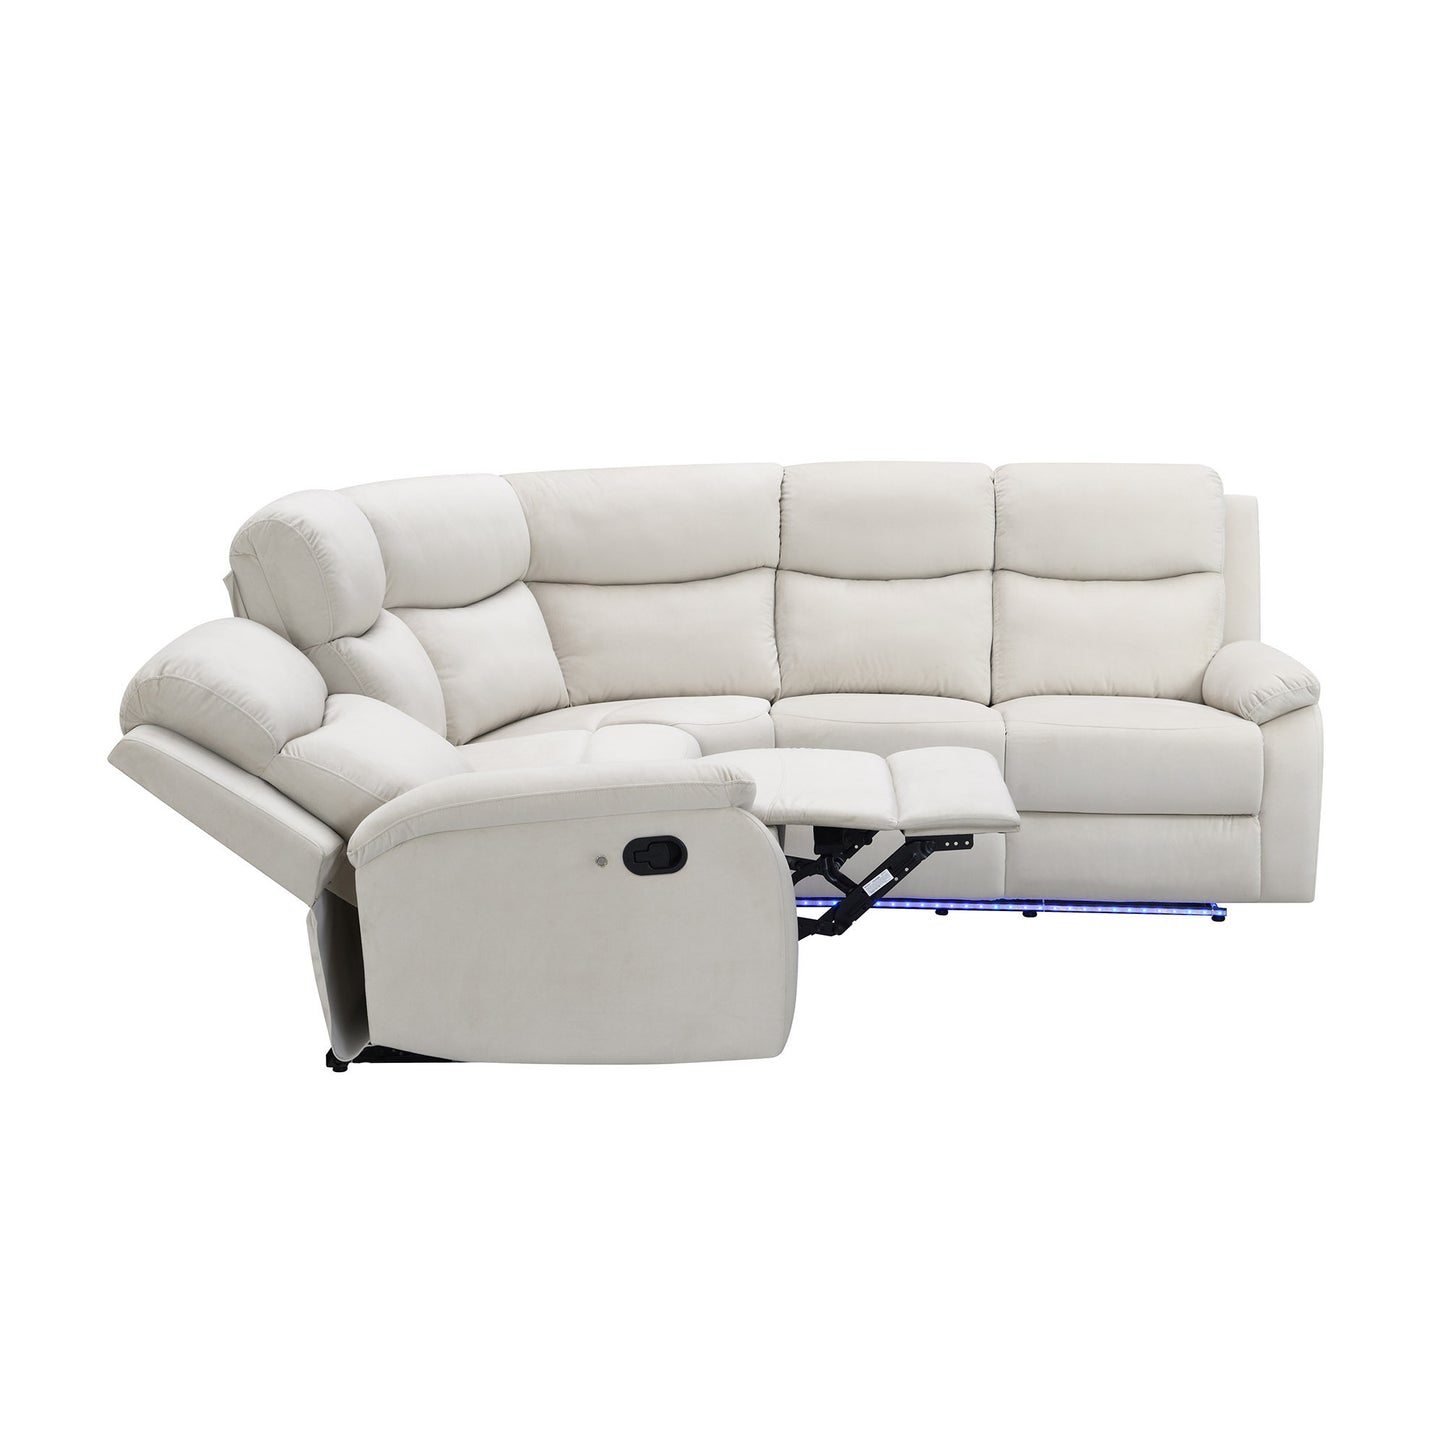 82.6" Home Theater Seating Seats Manual Chairs Recliner with LED Light Strip for Living Room, Beige